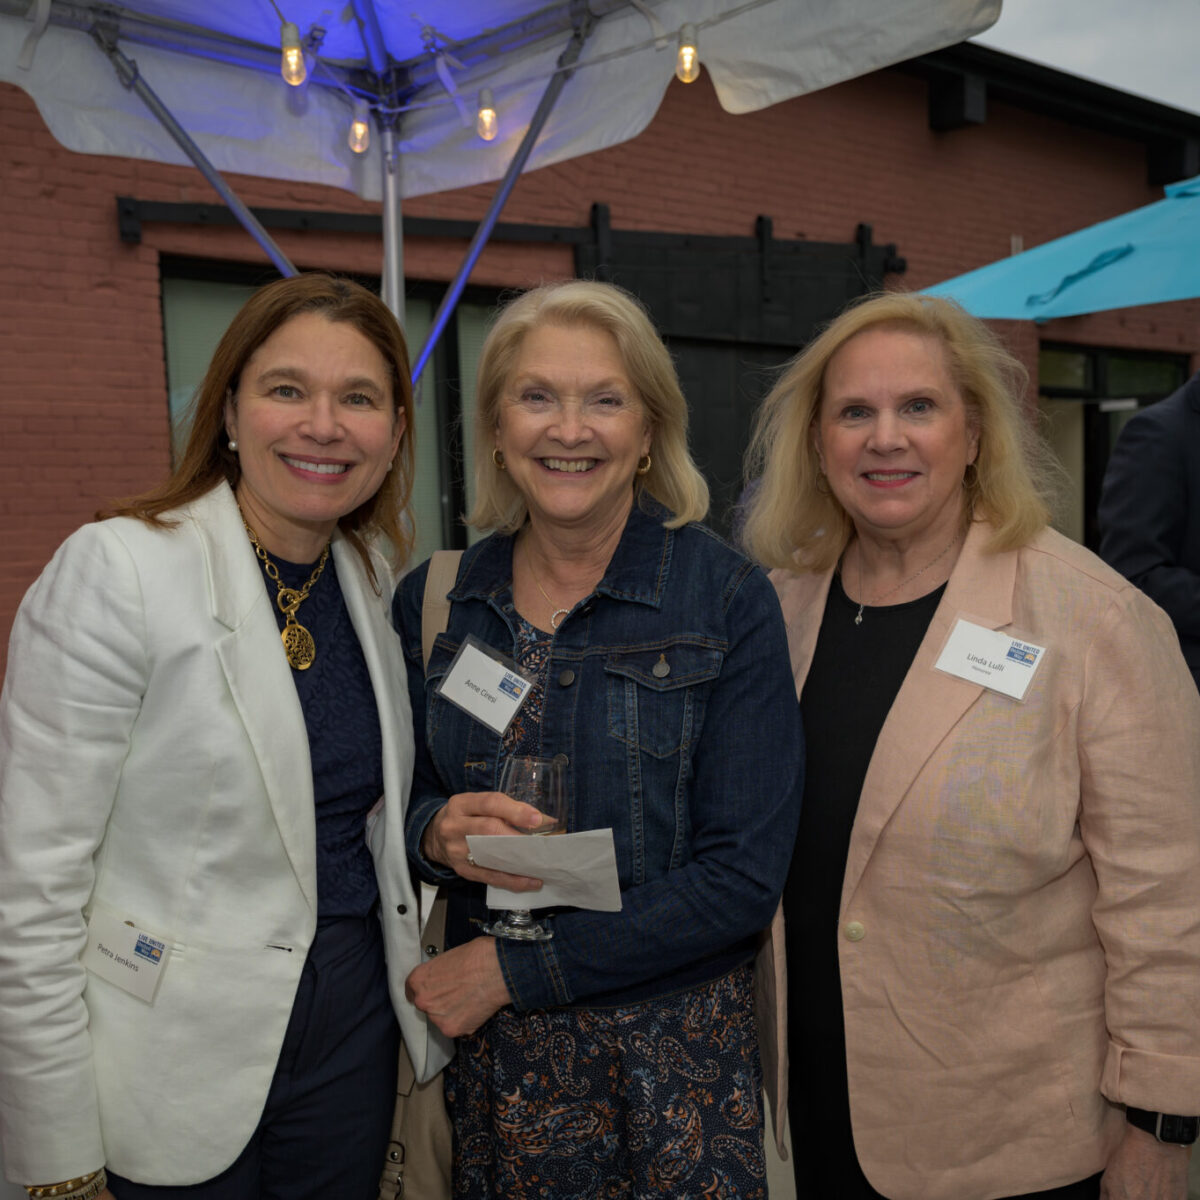 Linda Lulli, recipient of the Women United Award 2023, poses with Petra Jenkins and Anne Ciresi.